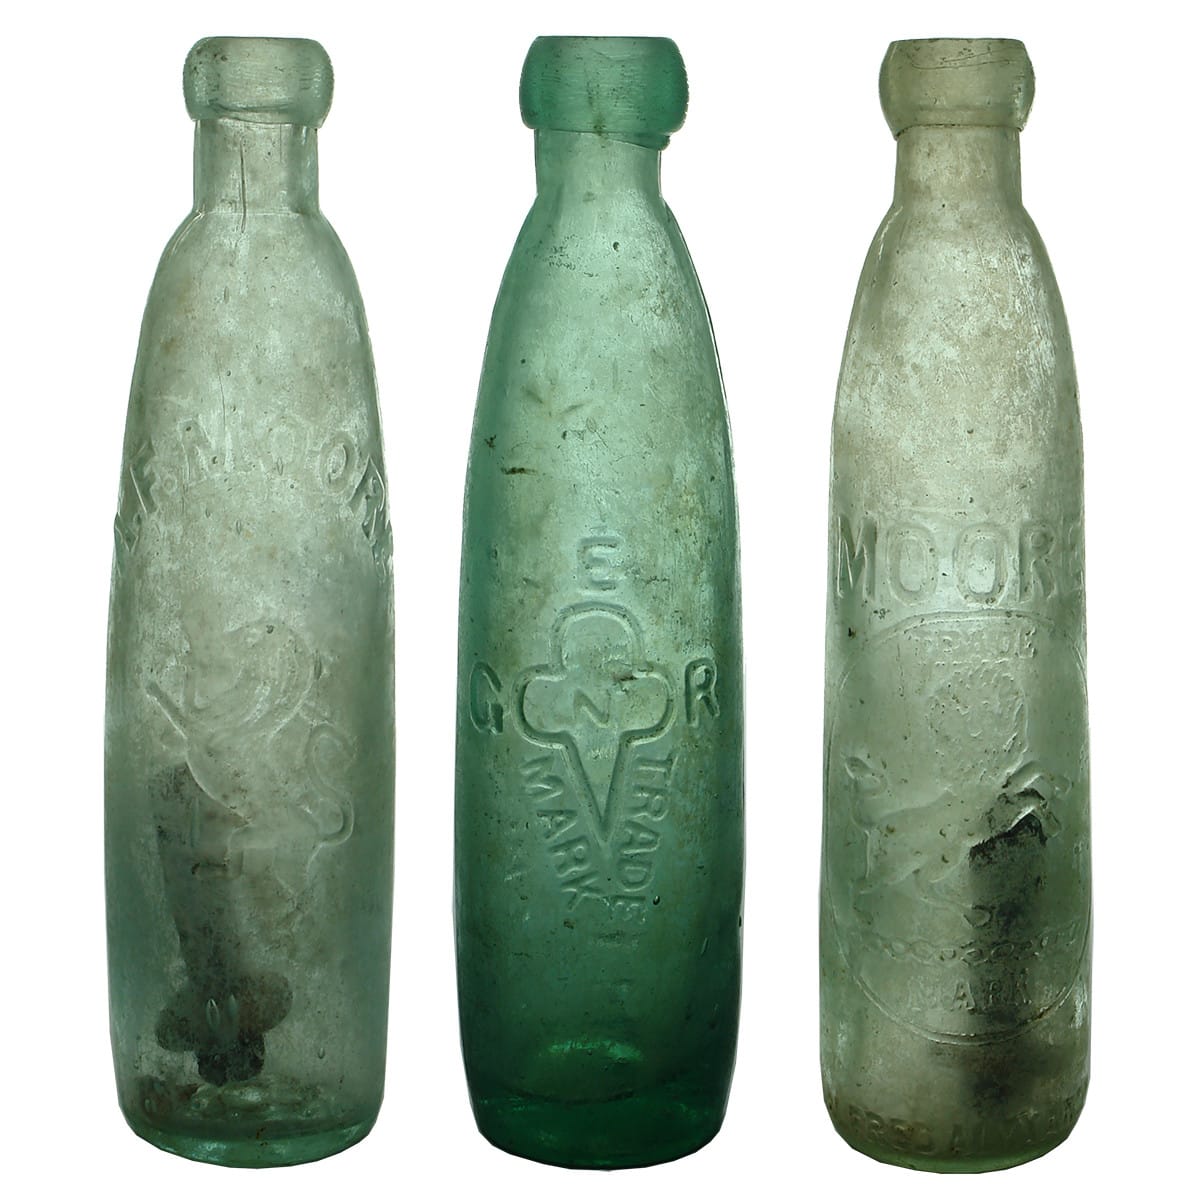 Three Stick Bottles: A. F. Moore , G. E. Redman and Moore, Newcastle. (New South Wales)